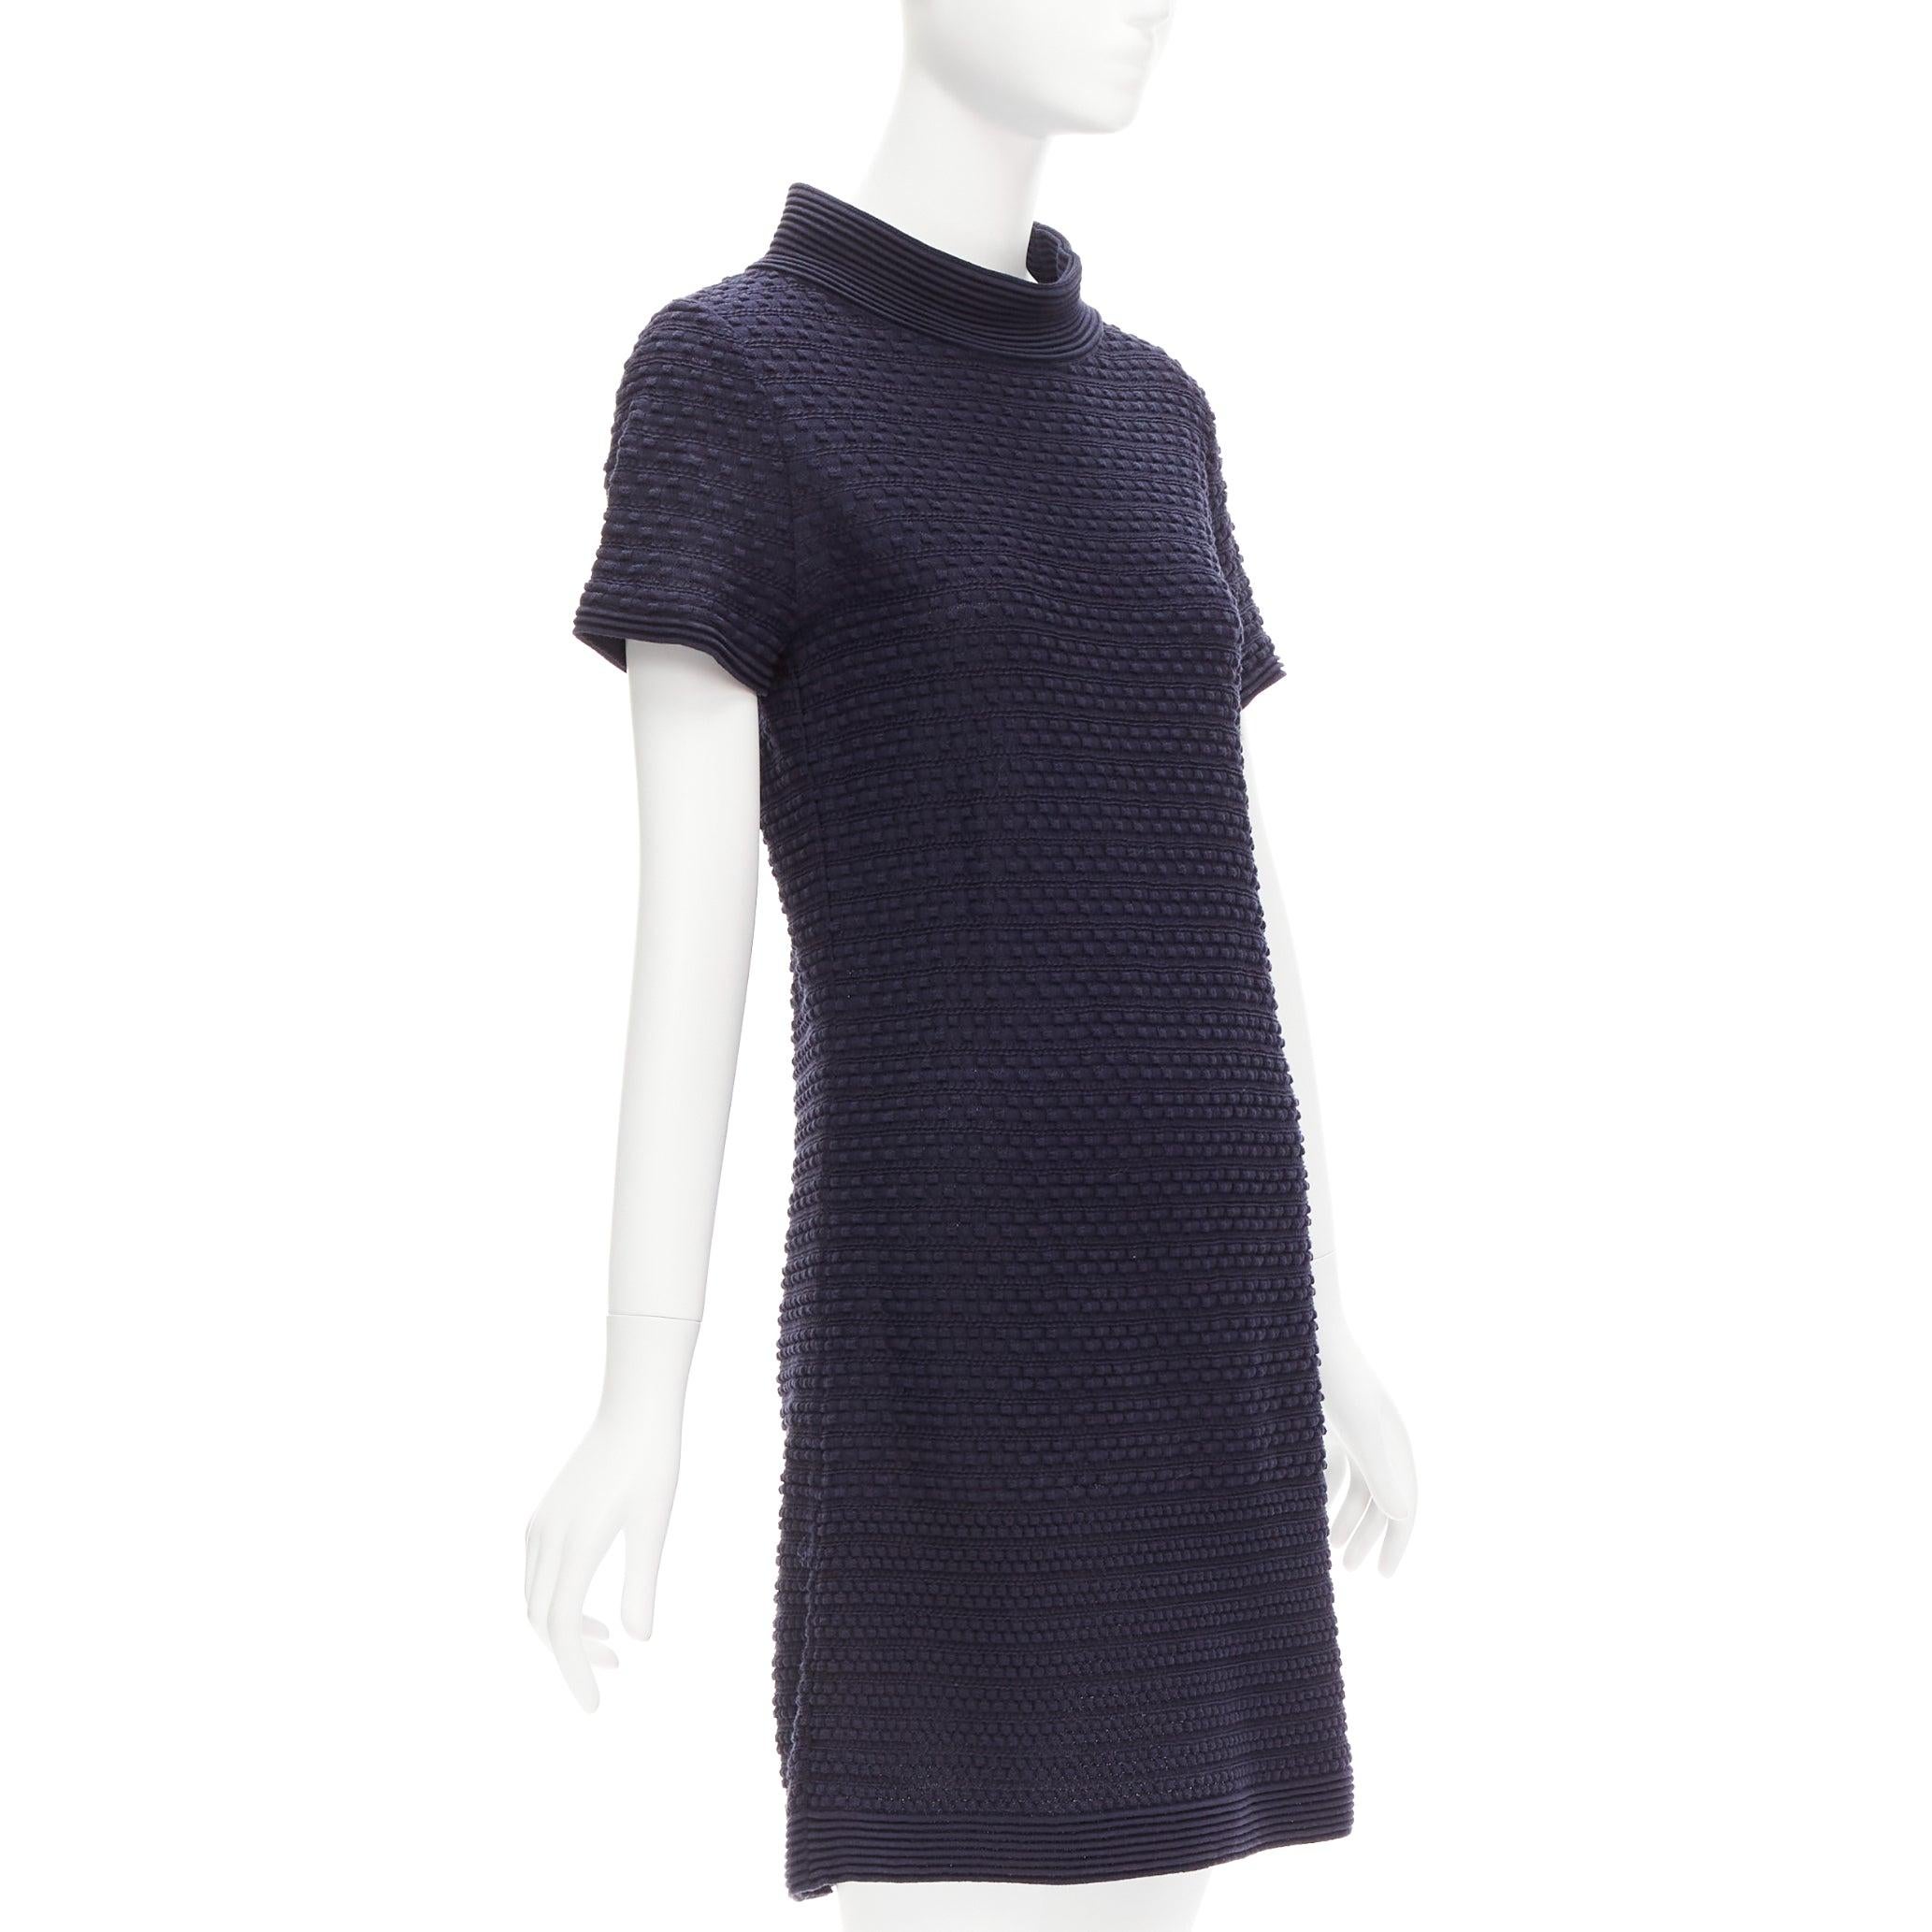 CHANEL navy CC logo button boat neck A-line knit mini dress FR38 M
Reference: TGAS/D00939
Brand: Chanel
Material: Cotton, Blend
Color: Navy
Pattern: Solid
Closure: Slip On
Made in: France

CONDITION:
Condition: Excellent, this item was pre-owned and